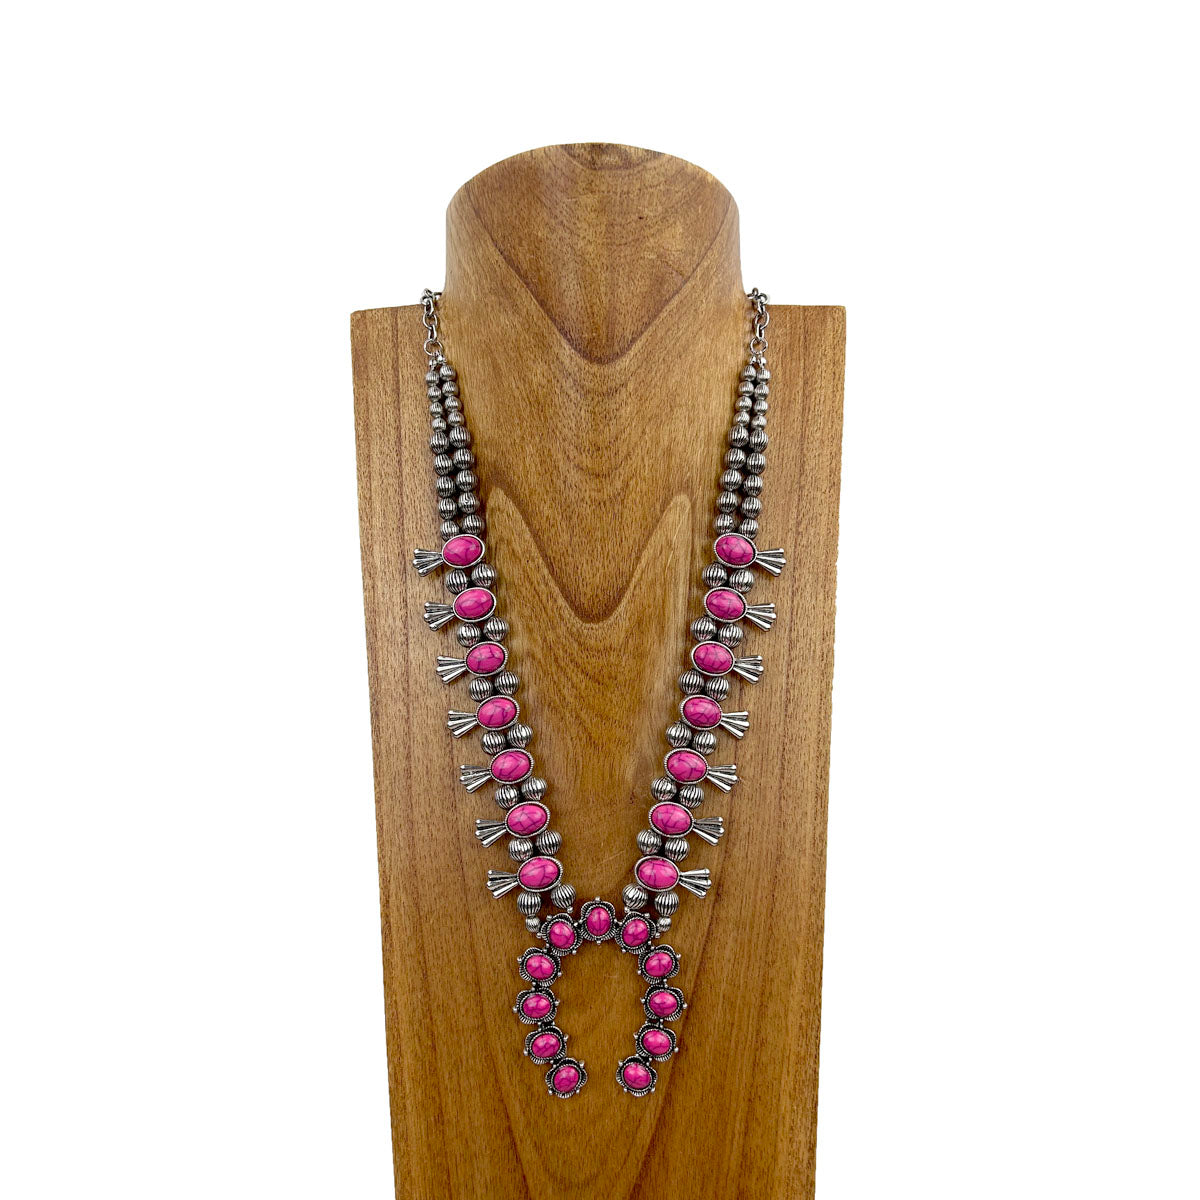 NKY180525-02-HOT PINK	Silver with hot pink stone squash blossom Necklace